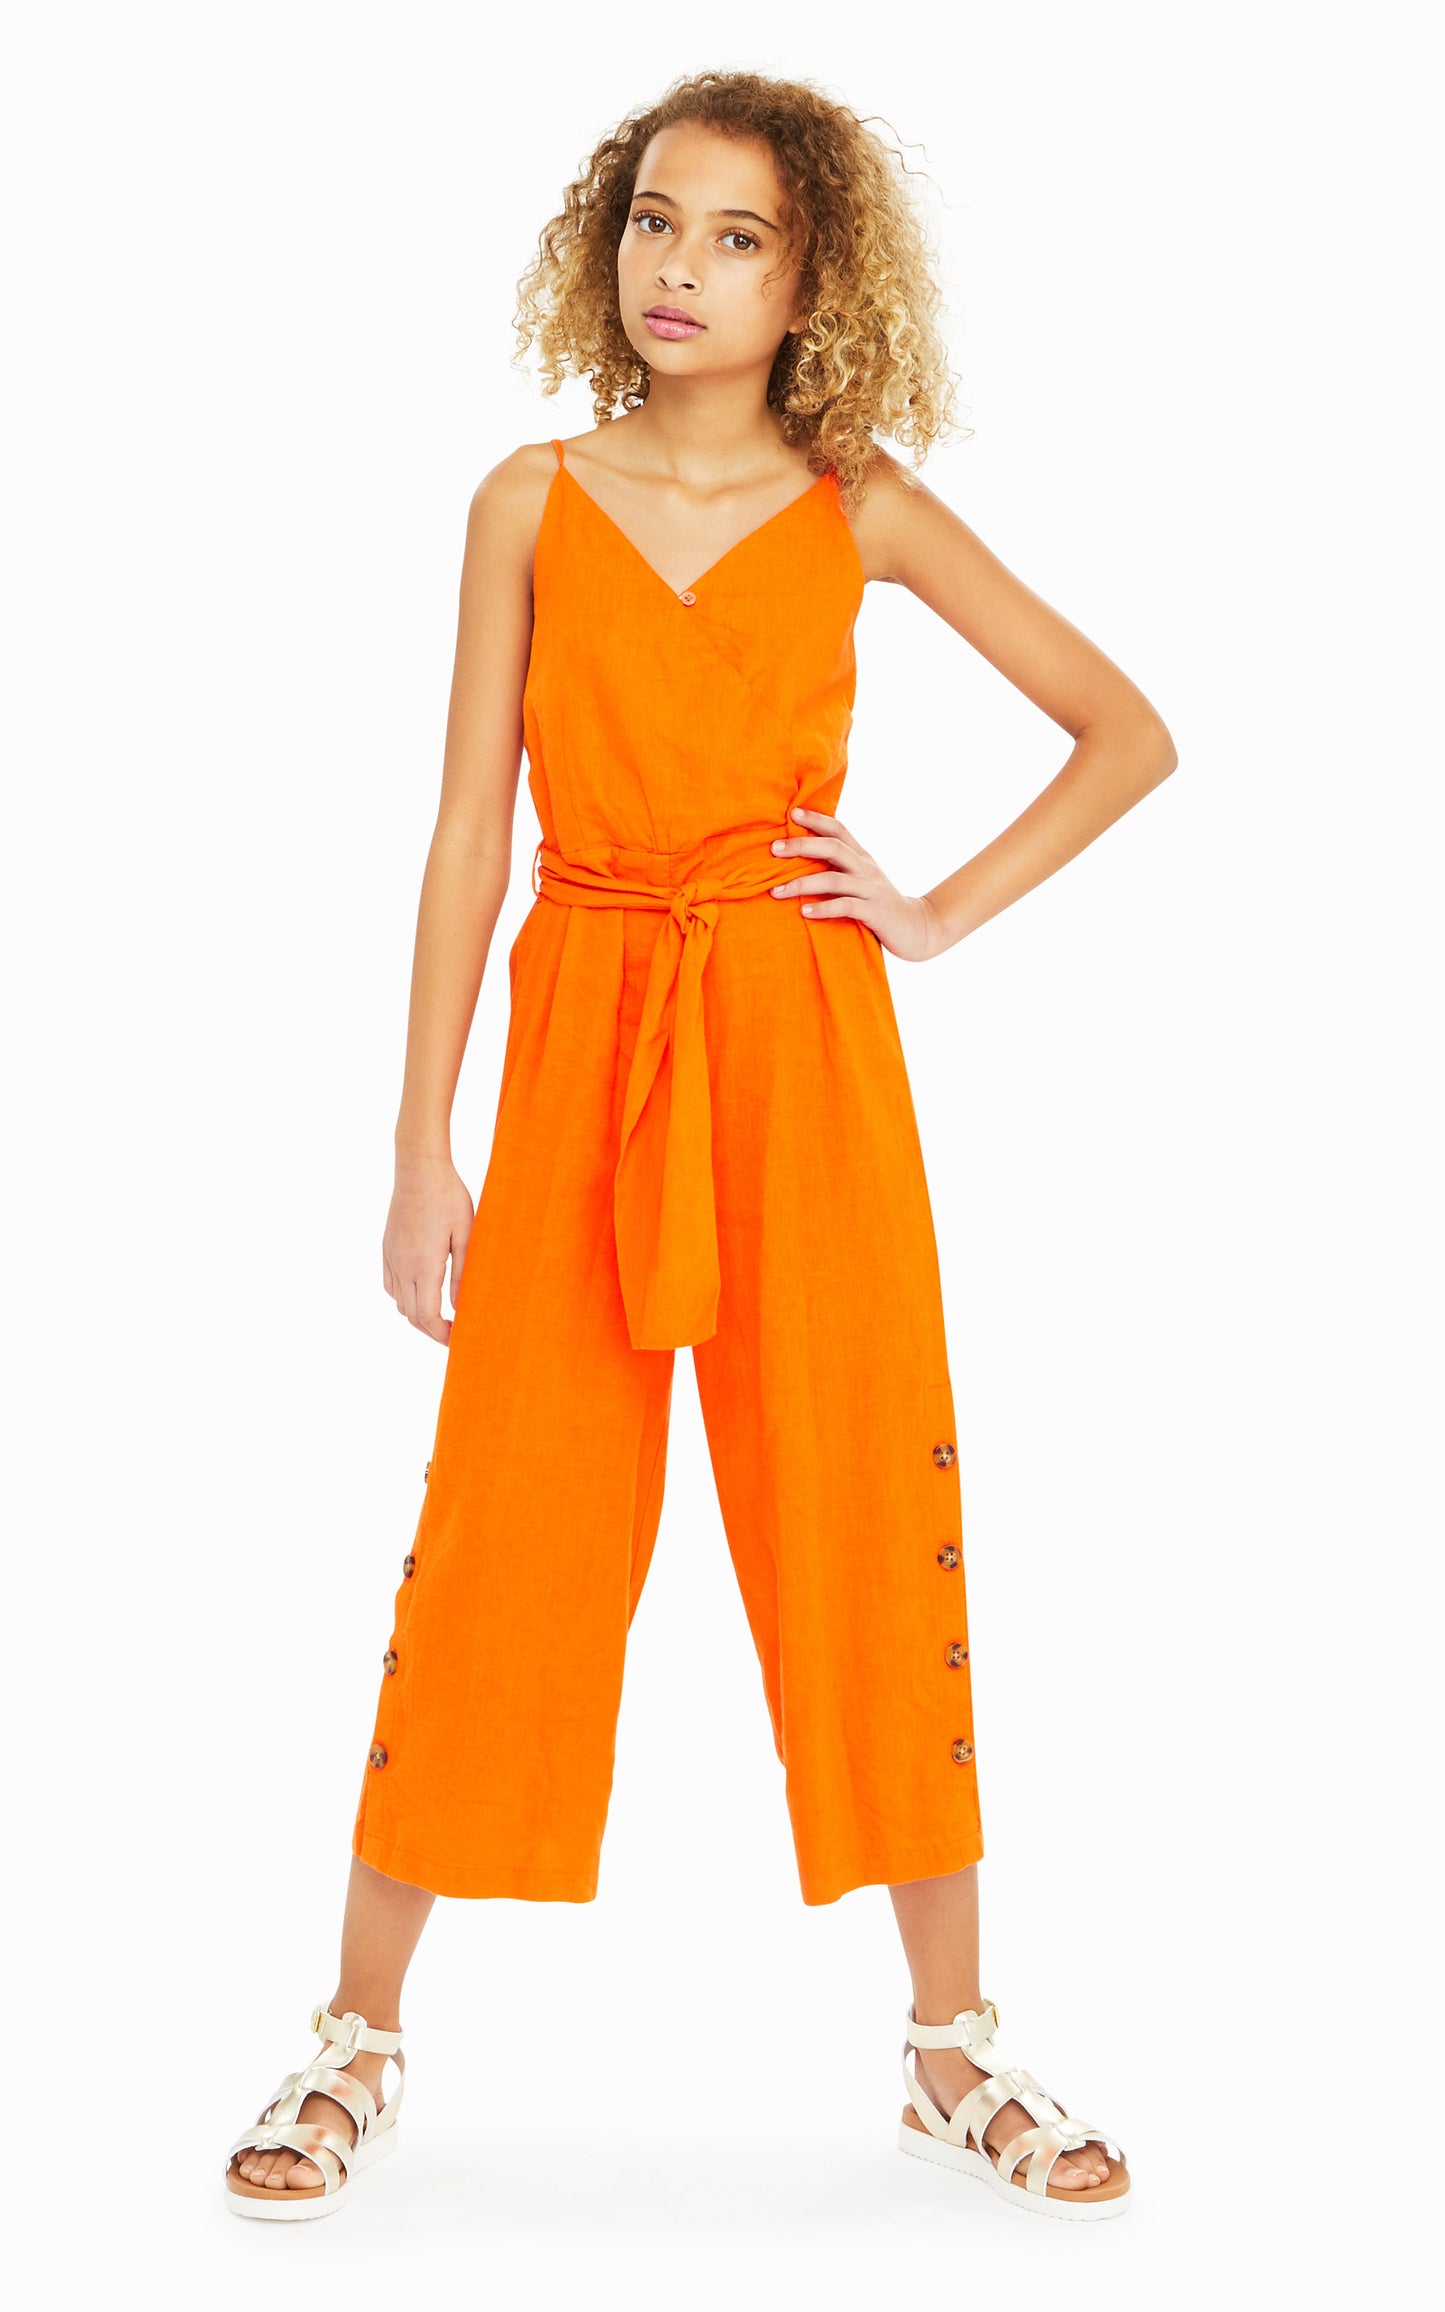 Girl wearing orange sleeveless jumpsuit with belted waist and leopard print button accents on legs.